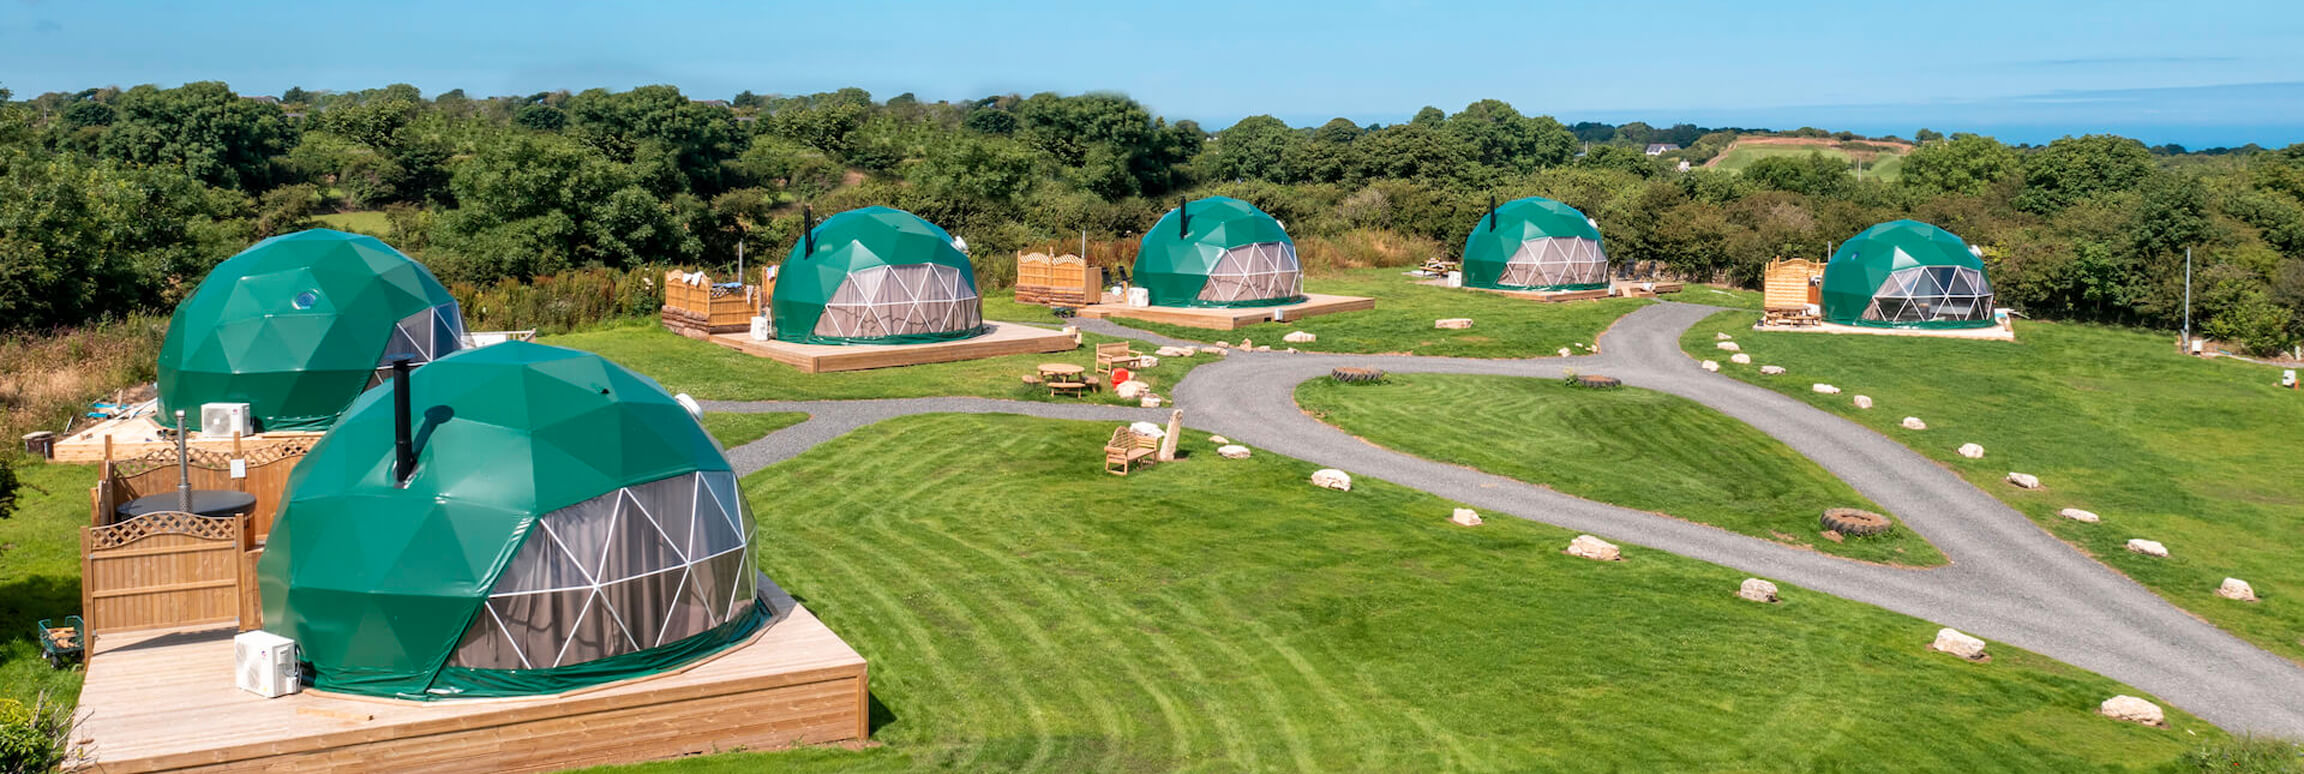 green geodesic dome tent